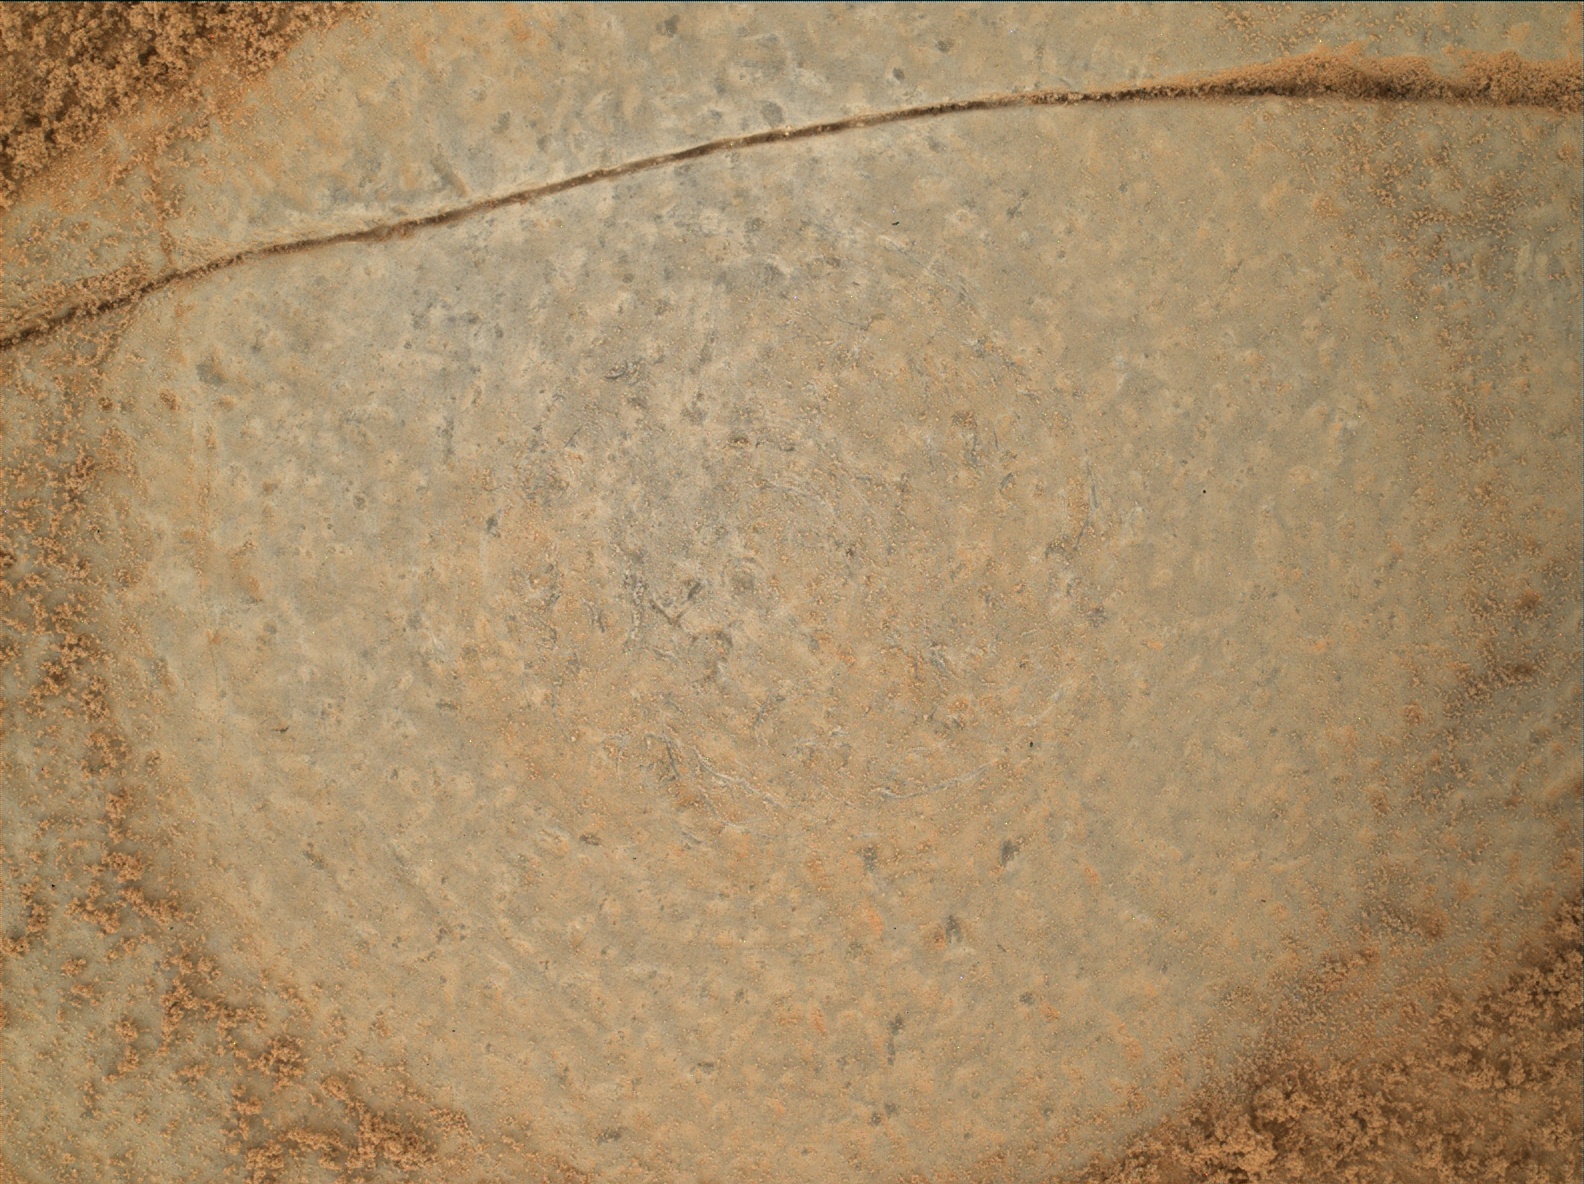 Nasa's Mars rover Curiosity acquired this image using its Mars Hand Lens Imager (MAHLI) on Sol 813